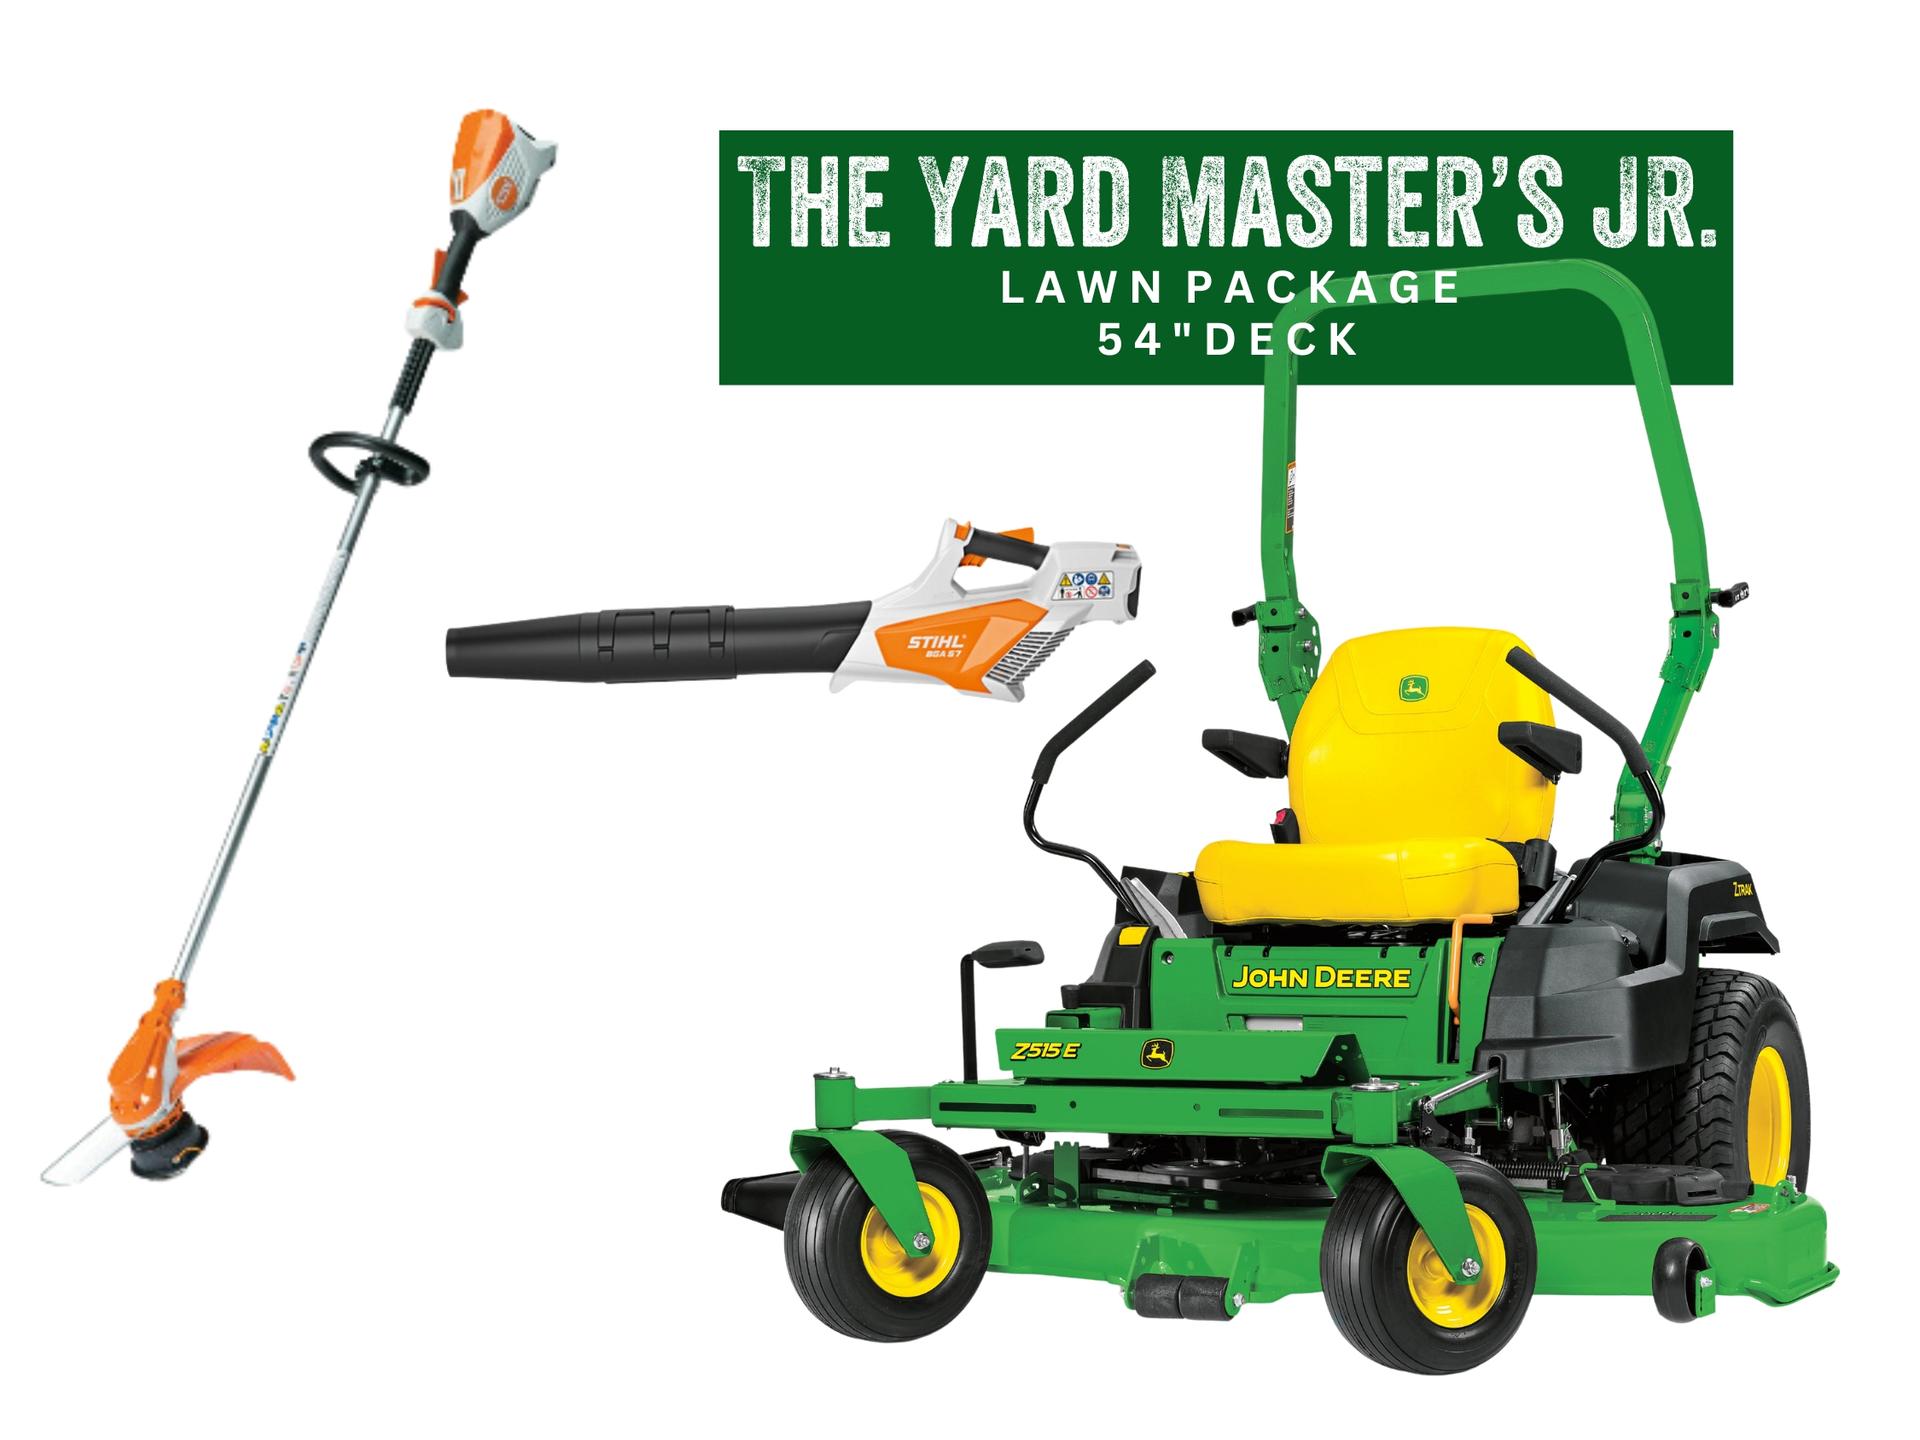 The Yard Master’s Jr. Lawn Package